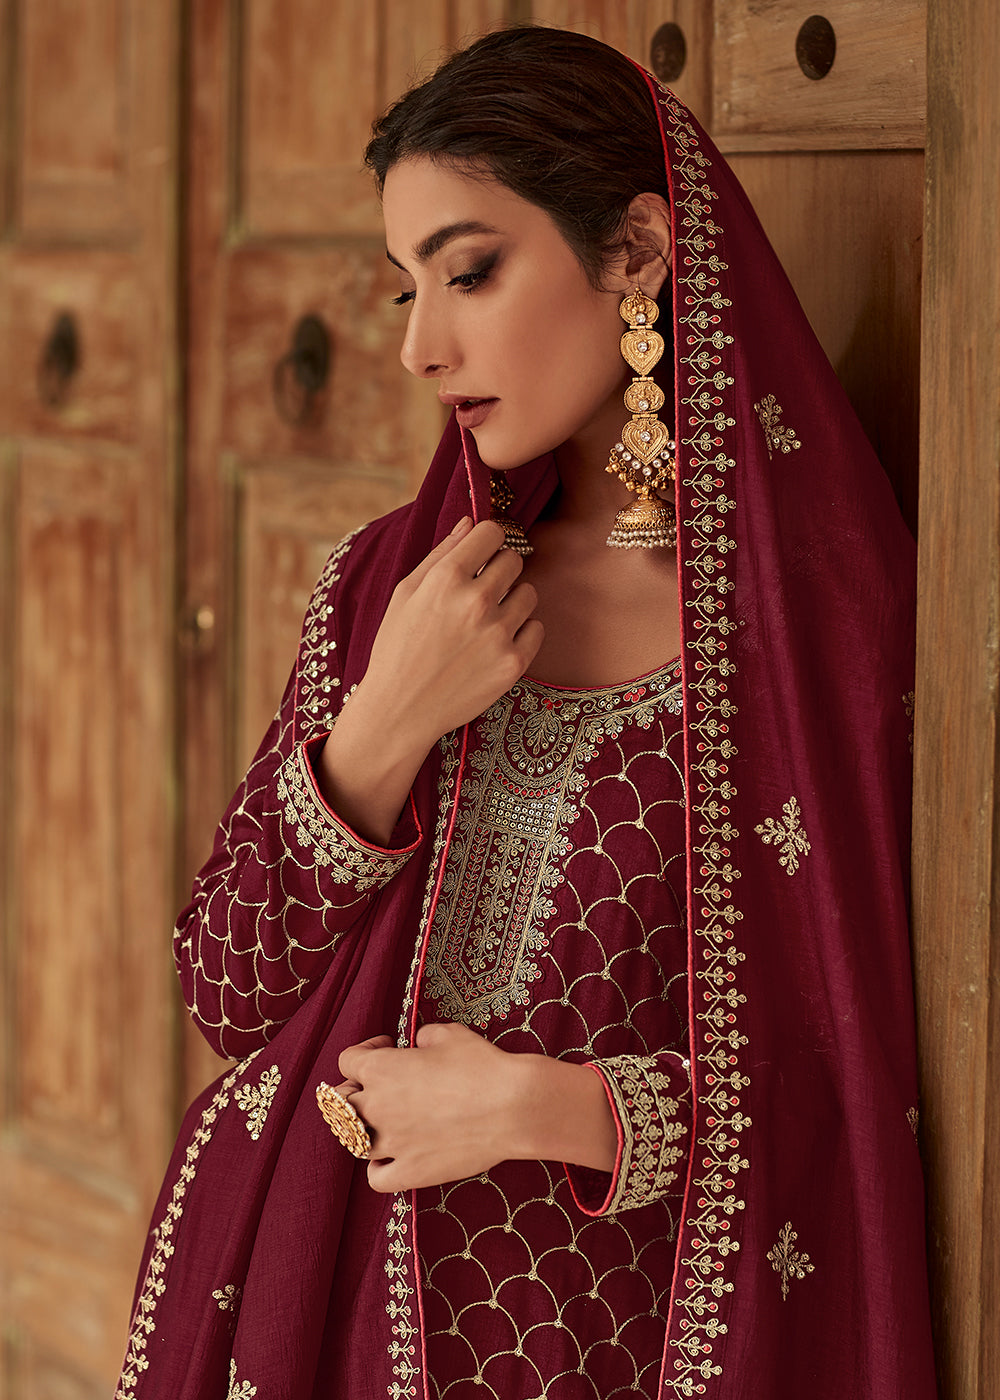 Buy Now Premium Silk Maroon & Gold Embroidered Indian Salwar Kameez Online in USA, UK, Canada & Worldwide at Empress Clothing. 